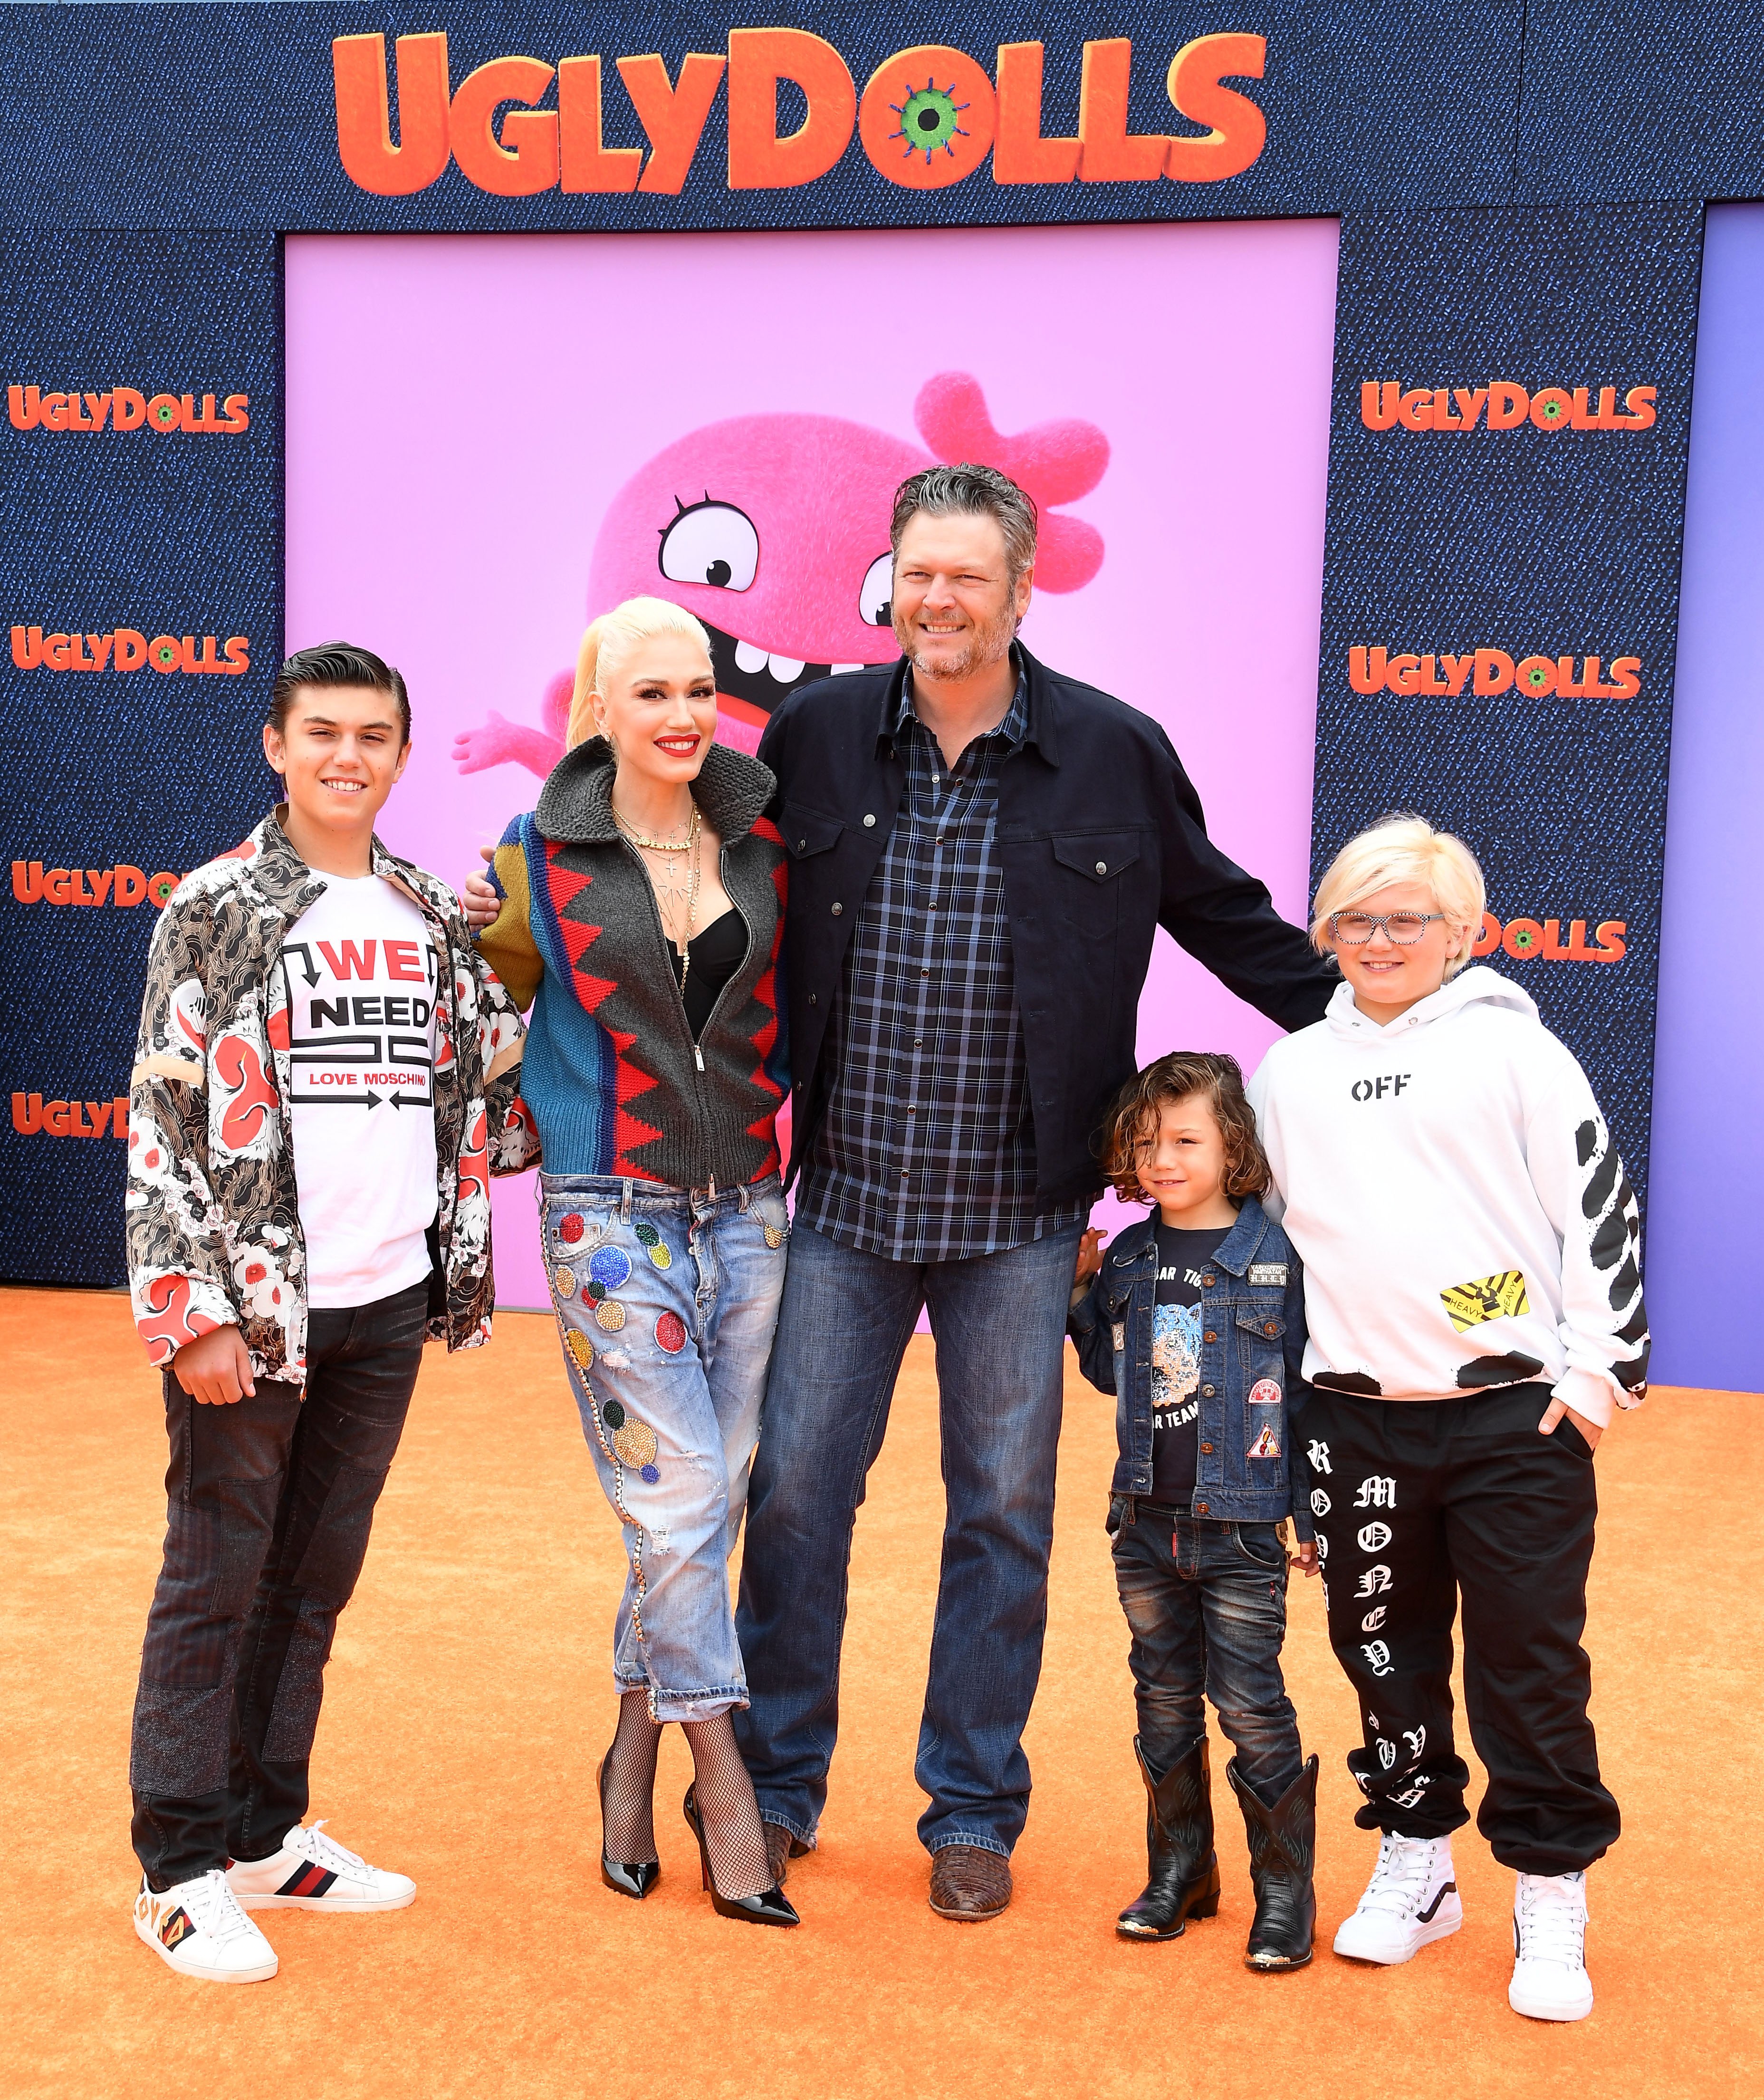 Kingston Rossdale, Gwen Stefani, Blake Shelton, Apollo Bowie Flynn Rossdale, and Zuma Nesta Rock Rossdale at the World Premiere of "UglyDolls" on April 27, 2019, in Los Angeles, California | Source: Getty Images